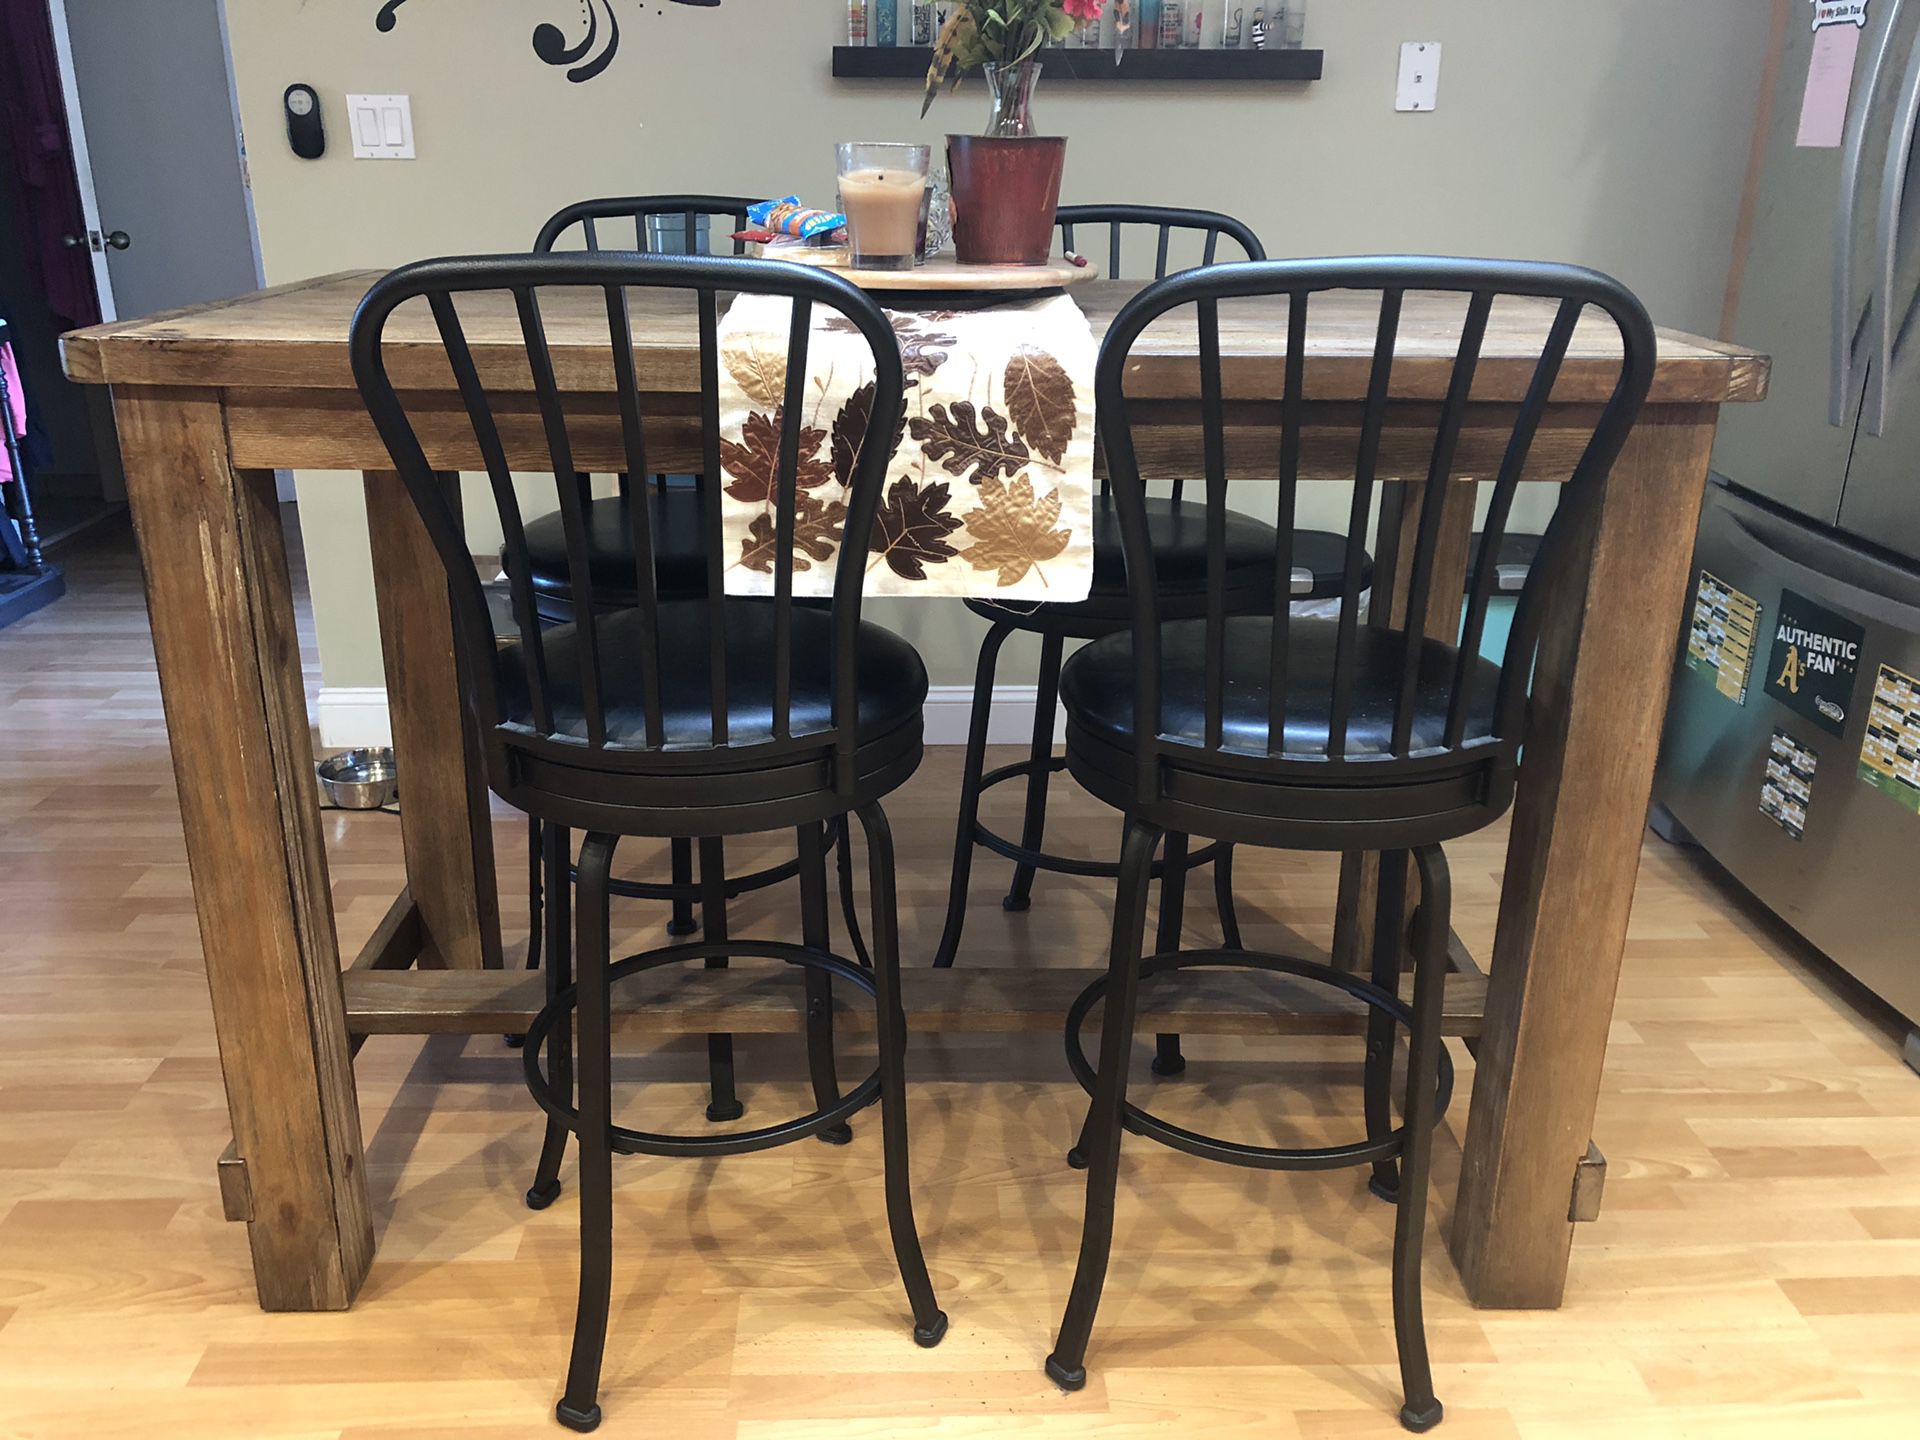 Bar height, kitchen table with chairs